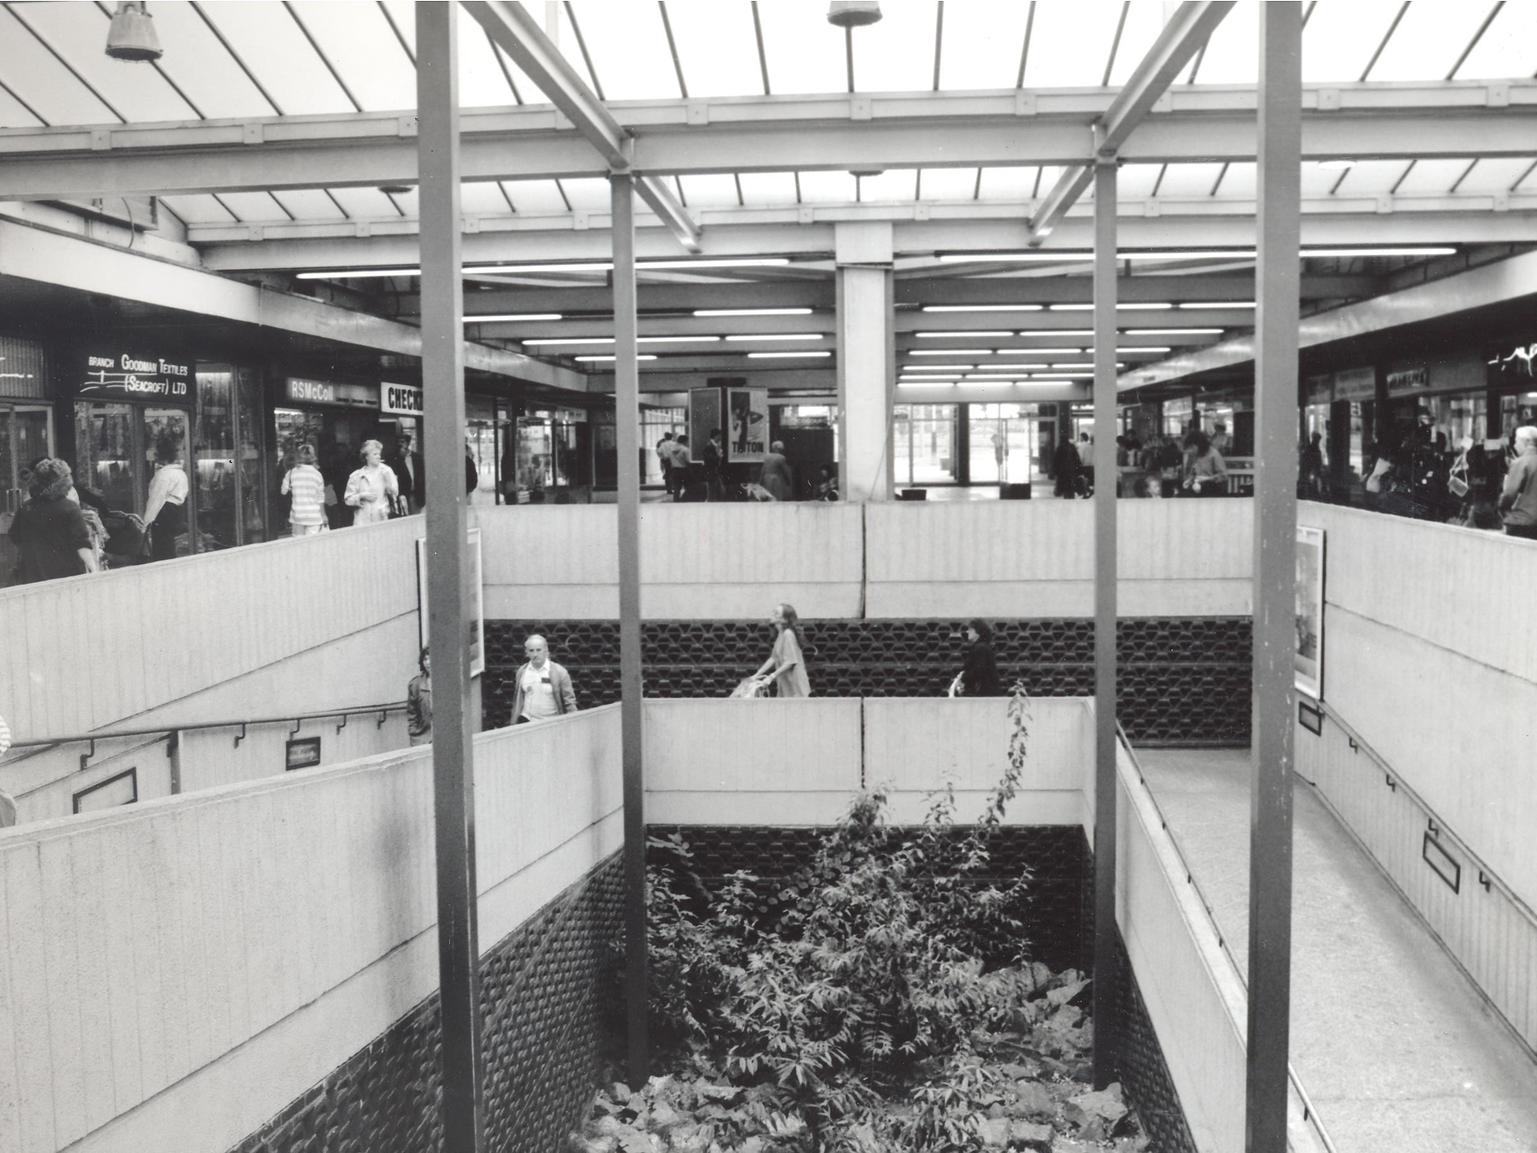 Is this the Seacroft Shopping Centre you remember?